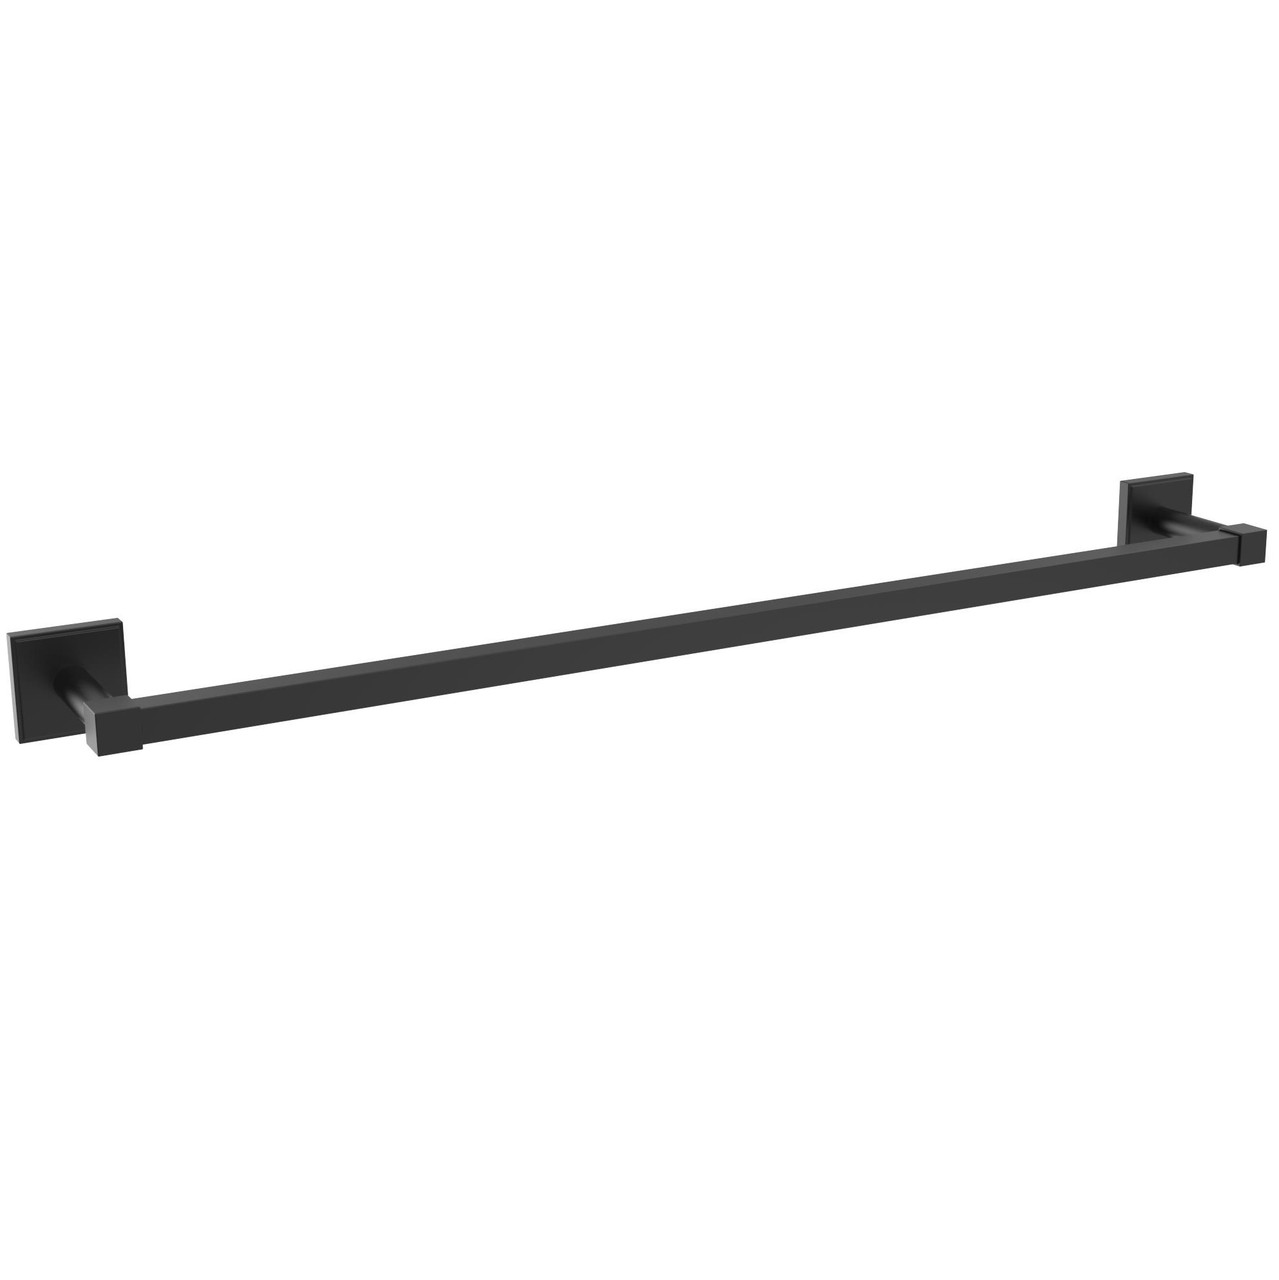 Amerock Appoint Traditional 24 in (610 mm) Towel Bar BH36074